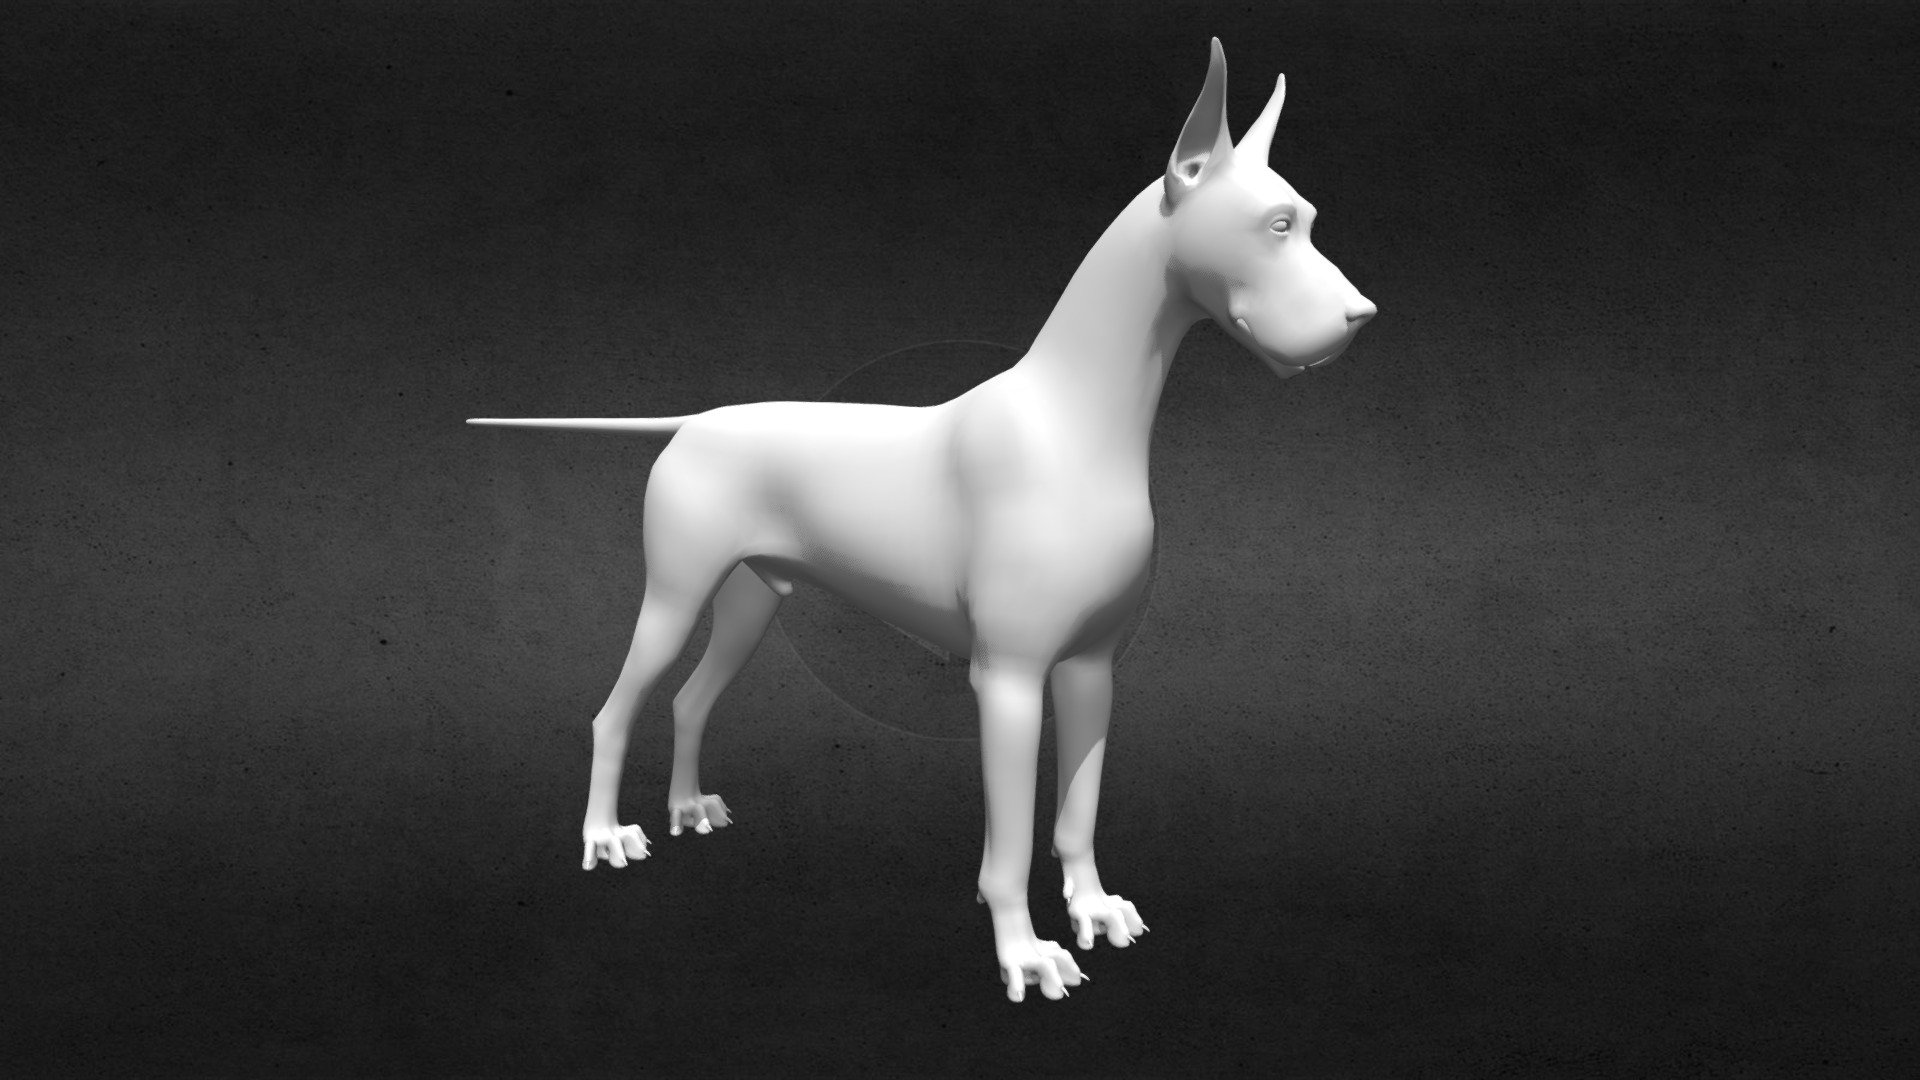 Part of my progress in my 3-month internship at Full Sail University, for character modeling. Tasked with modeling and sculpting a realistic great Dane dog. 

Great Dane model, lowpoly version. 
Testing sketchfab settings 3d model